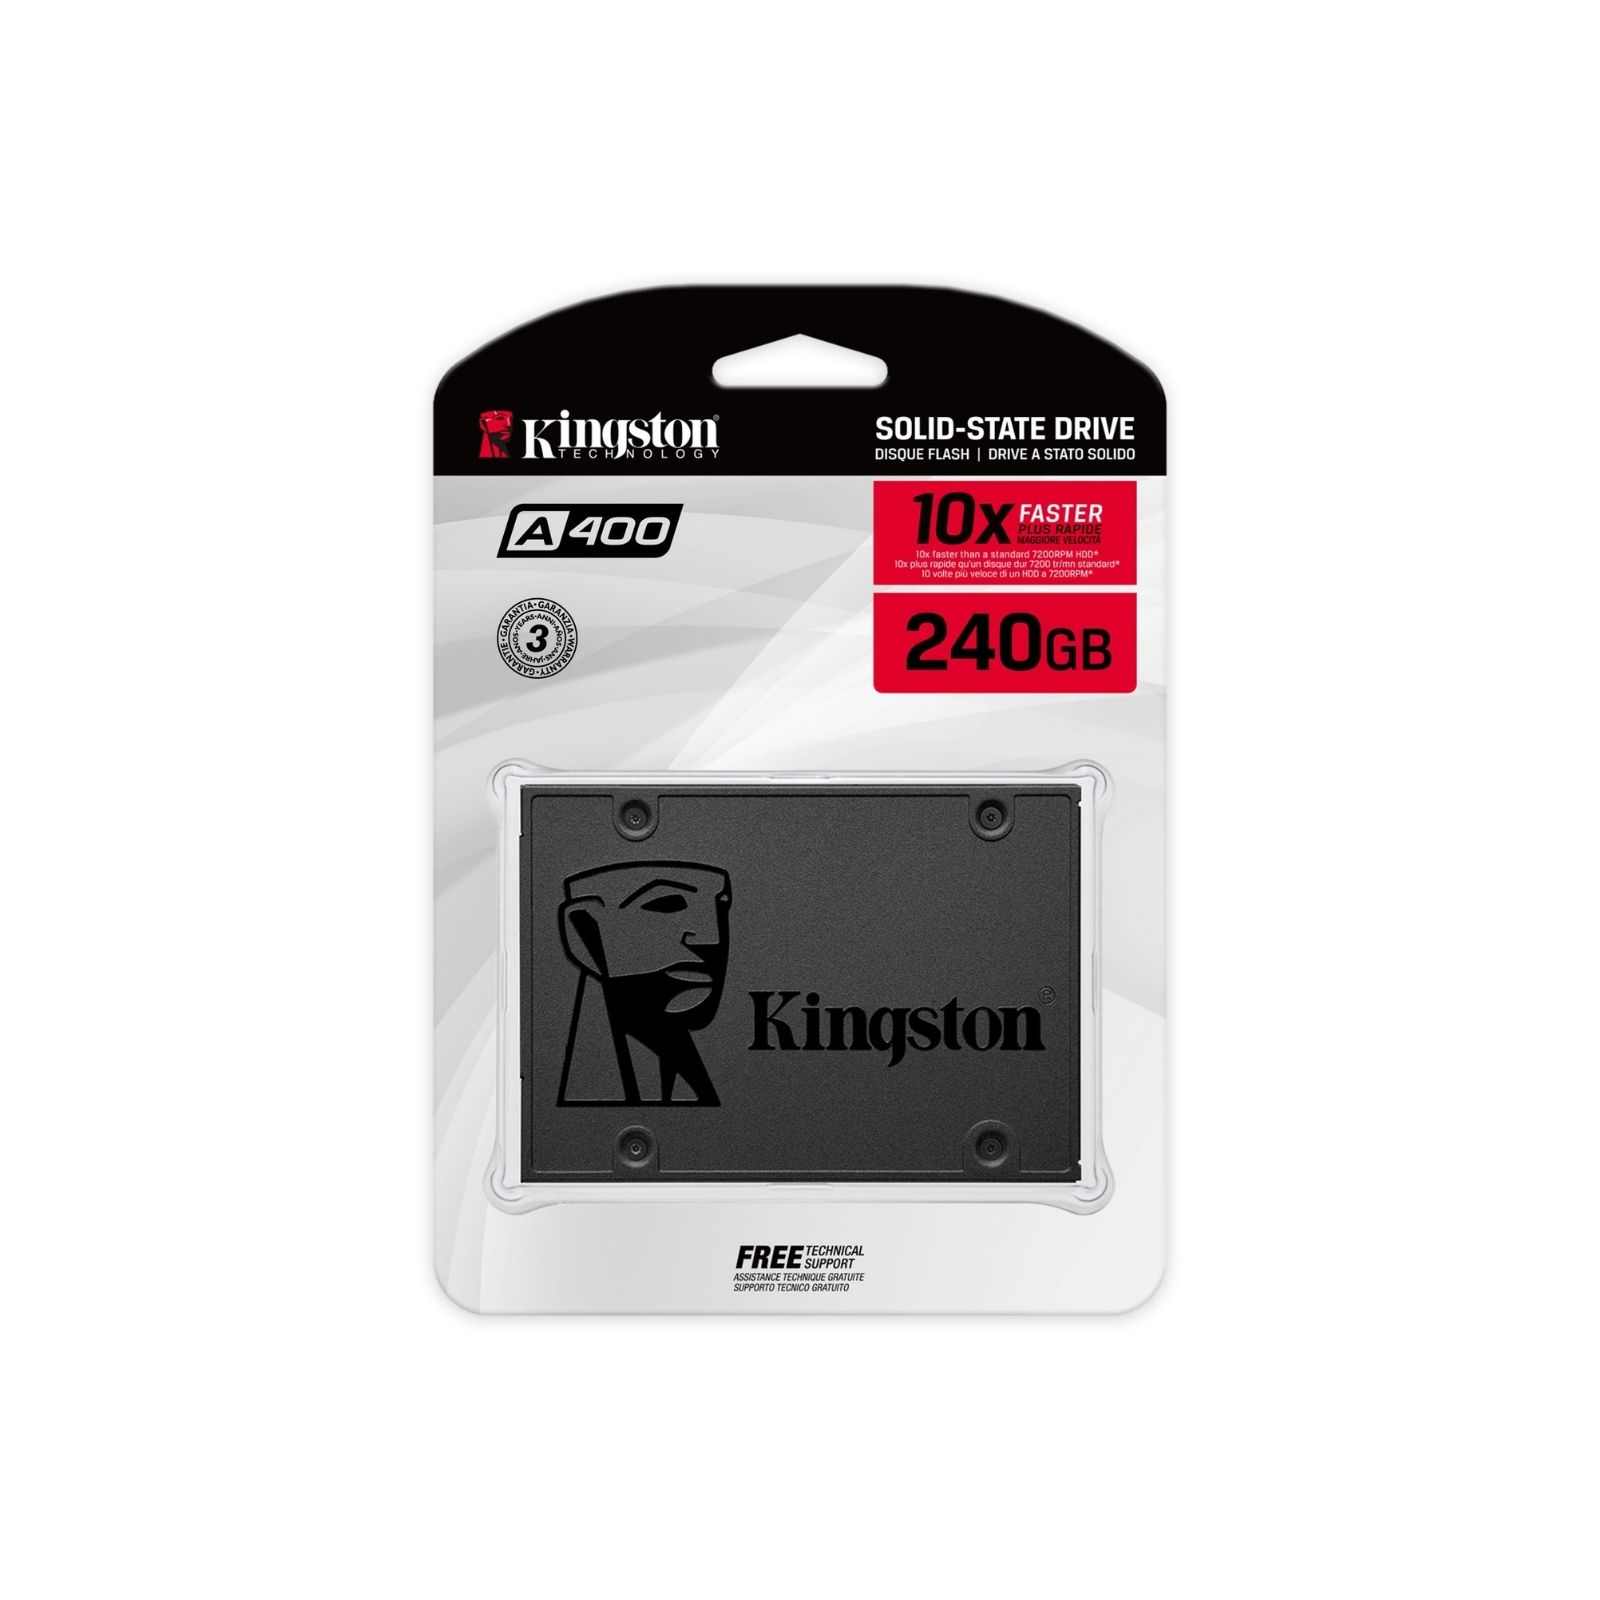 Kingston Sa400s37/240g A400 Ssd Tlc Solid-State Drive 2.5″ 240gb Sata6g – Phison's 3111-S11 Single-Core Controller / Dual-Channel With Ldpc ( Low-Density Parity Check ) Compressible Data (Atto) Read/Write : 500/350mb/Sec 1 Millions Mtbf W